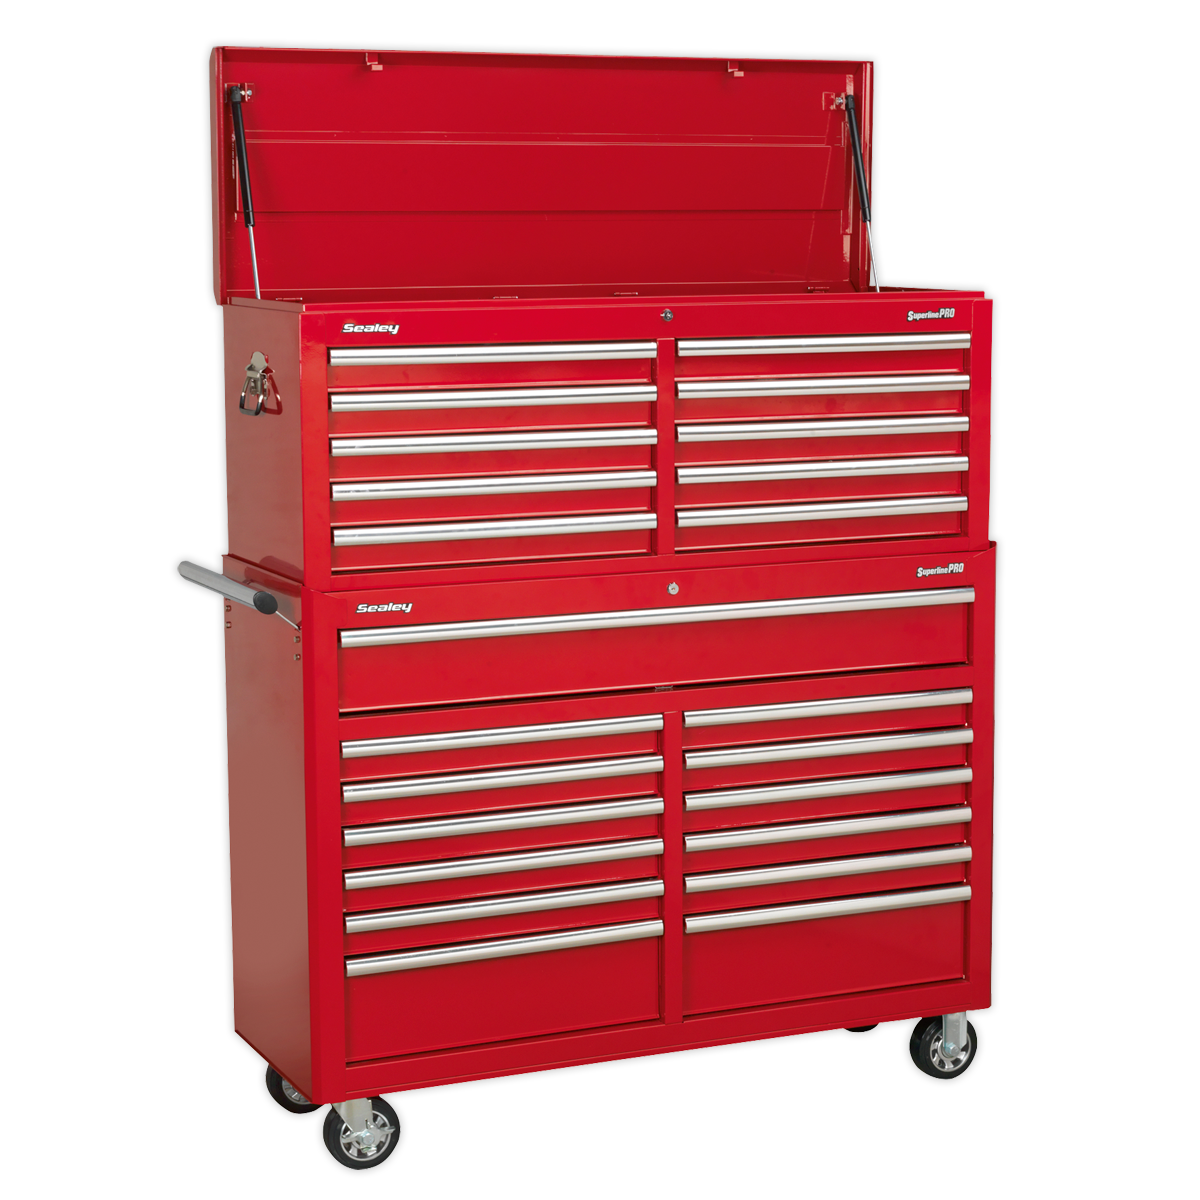 Tool Chest Combination 23 Drawer with Ball-Bearing Slides - Red - AP52COMBO1 - Farming Parts